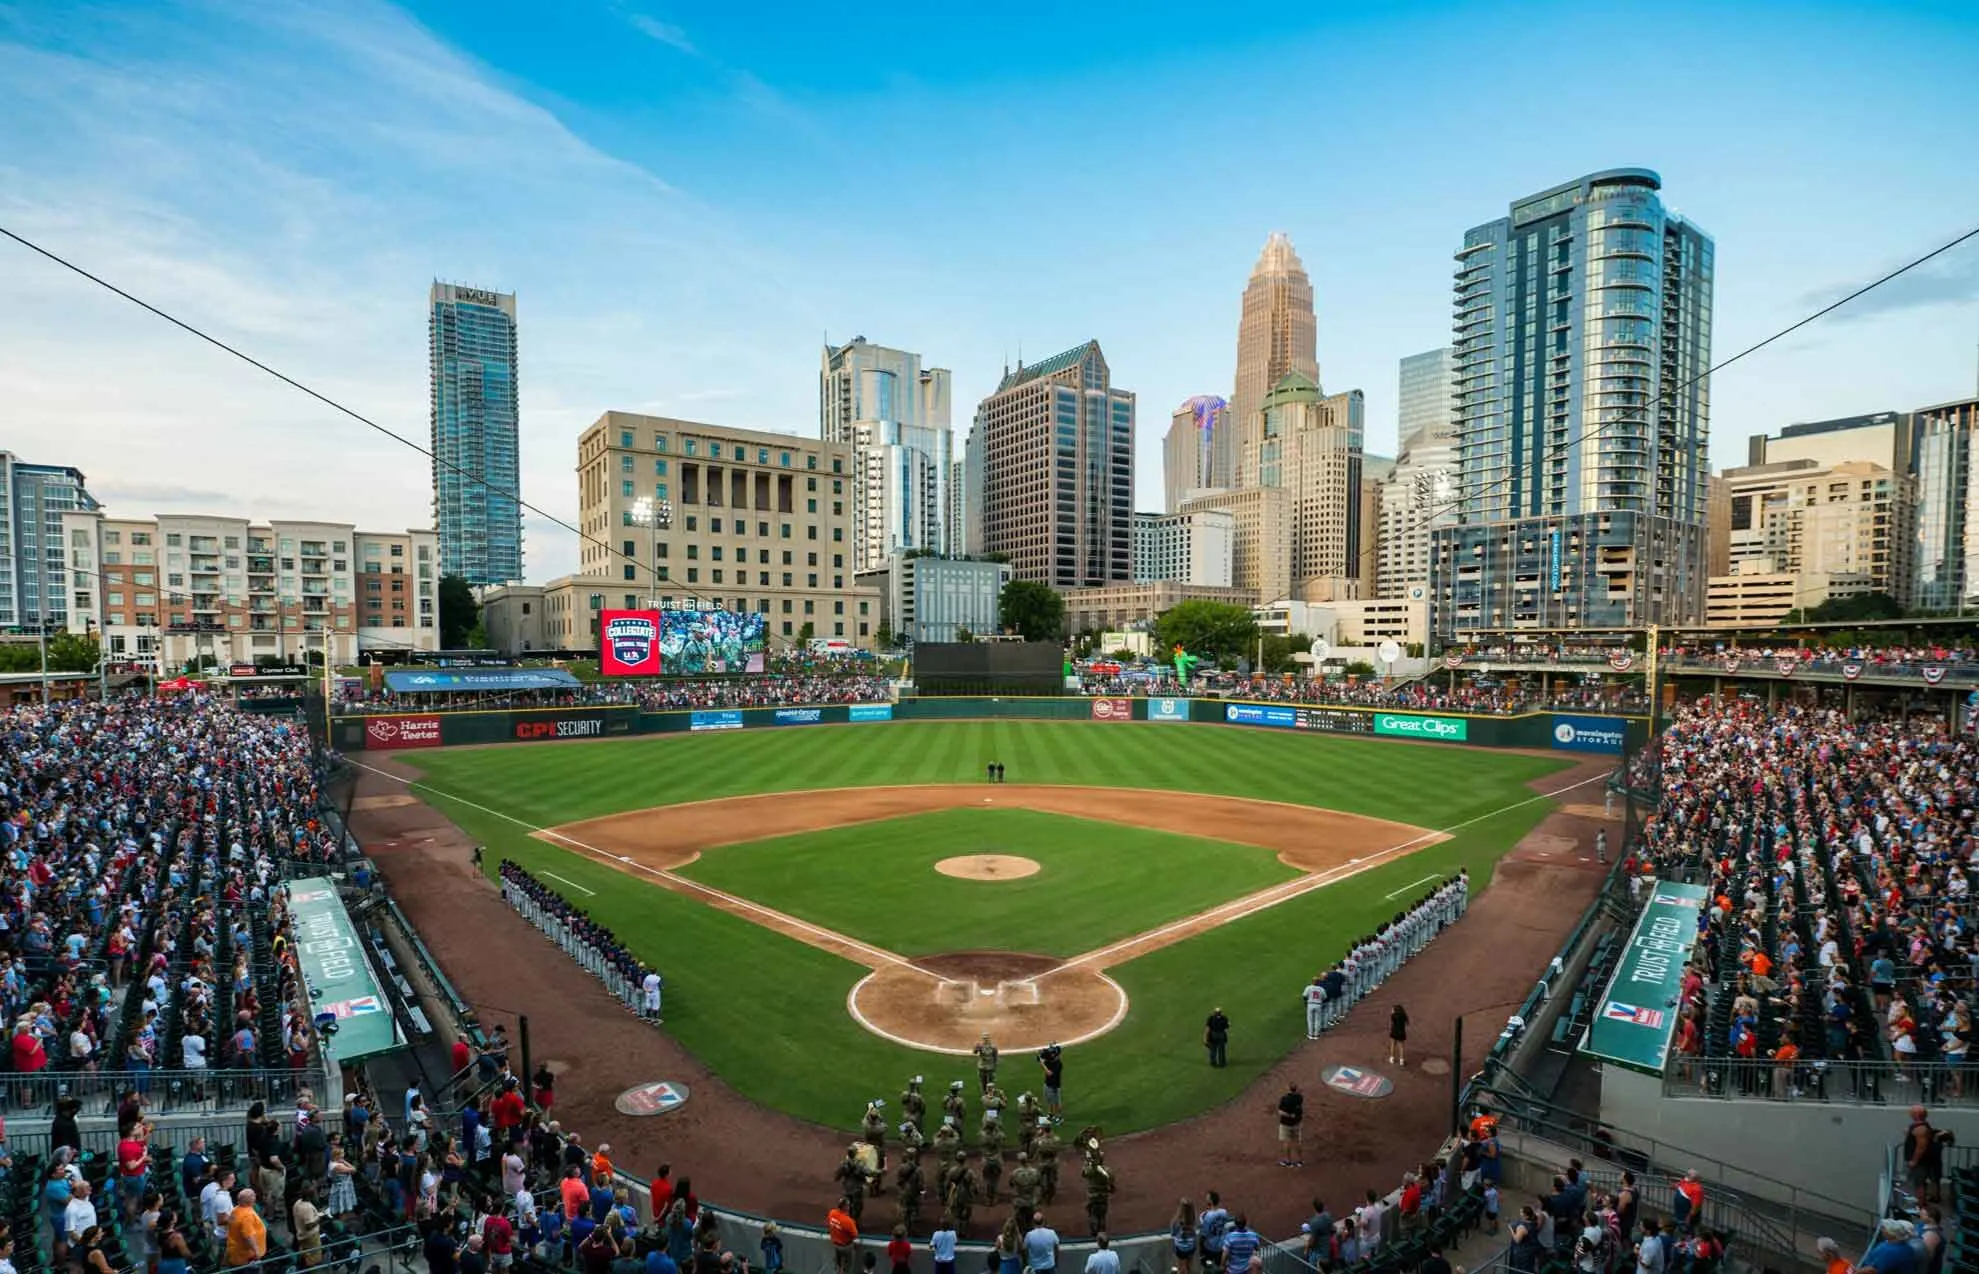 Wyndham Hotels and Resorts is now the Official Hotel Partner of Minor League Baseball (MiLB) with its award-winning loyalty program, Wyndham Rewards, MiLB’s Official Hotel Loyalty Partner. Above: Truist Field, home of the Charlotte Knights, in Charlotte, NC.